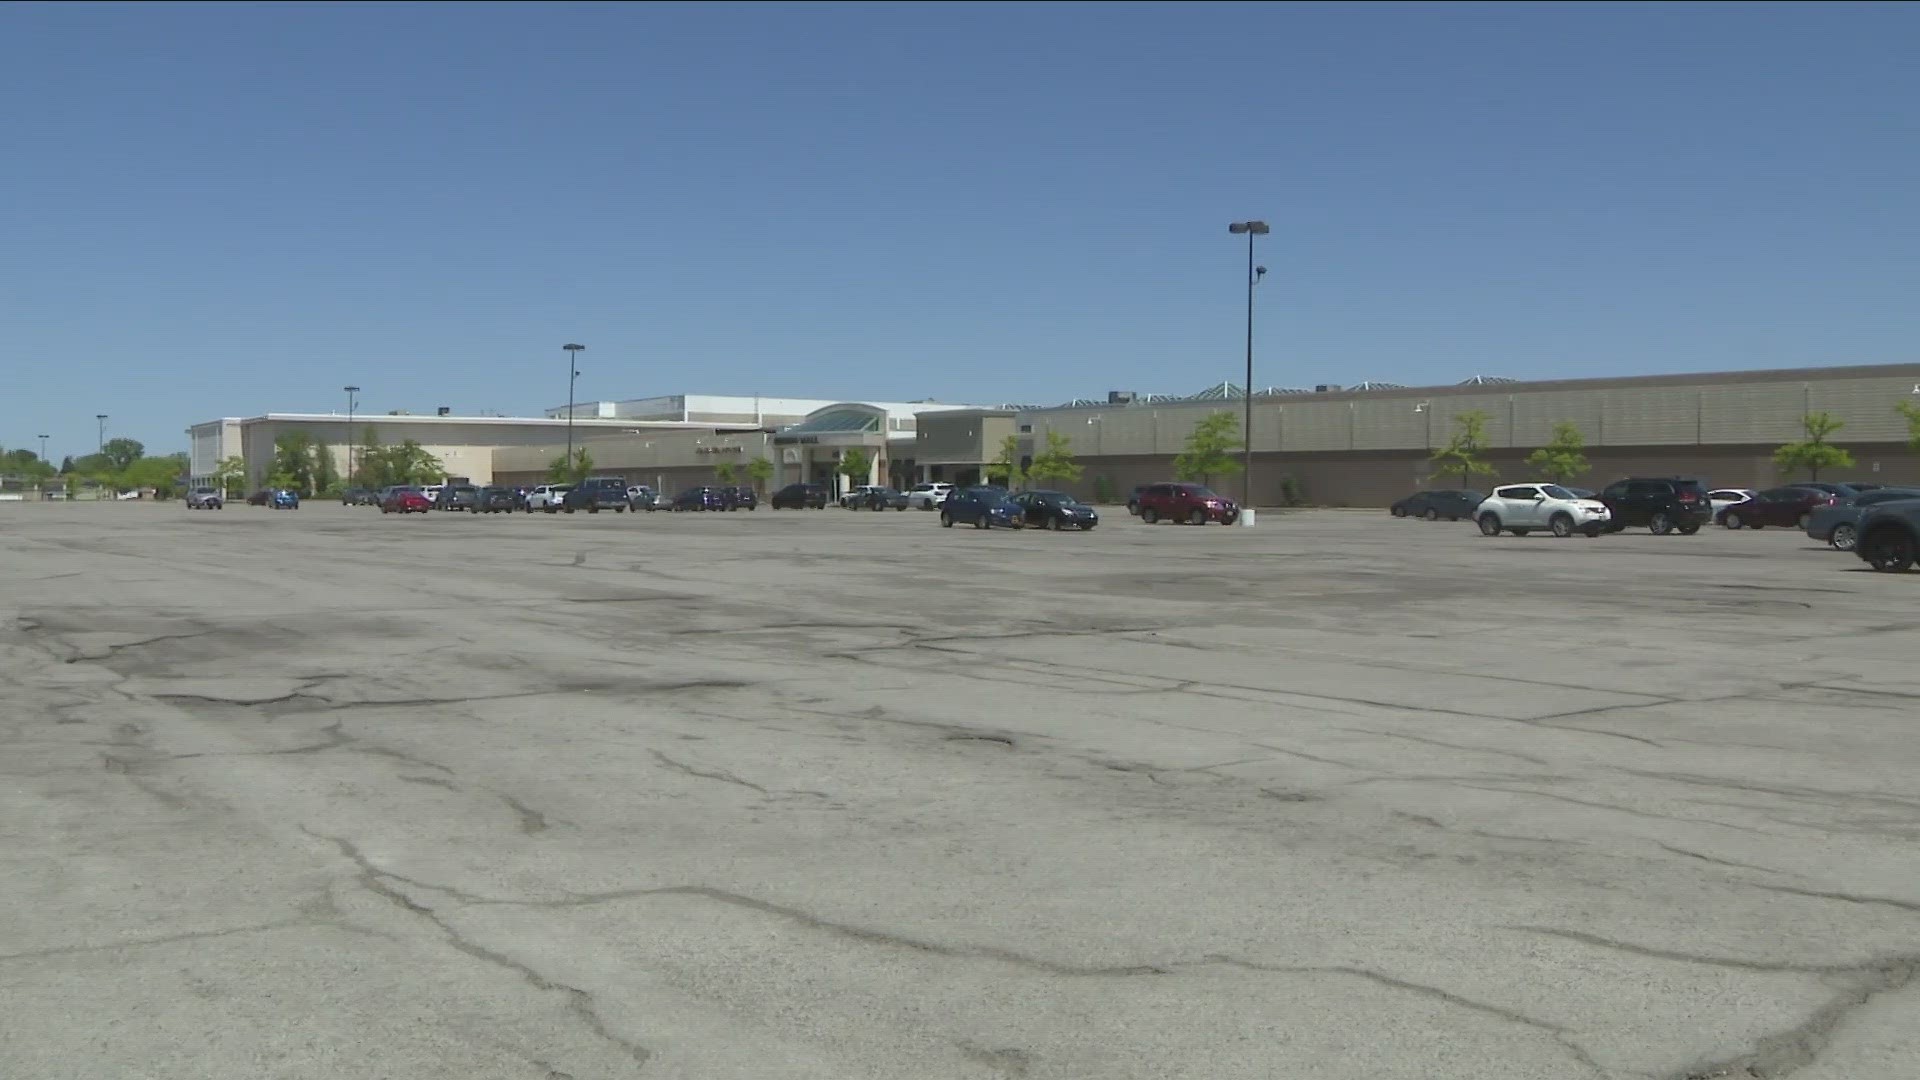 An effort to transform the Boulevard Mall into a mixed-use neighborhood continues...with the town of Amherst now seeking to clear a legal path, for the infrastructur